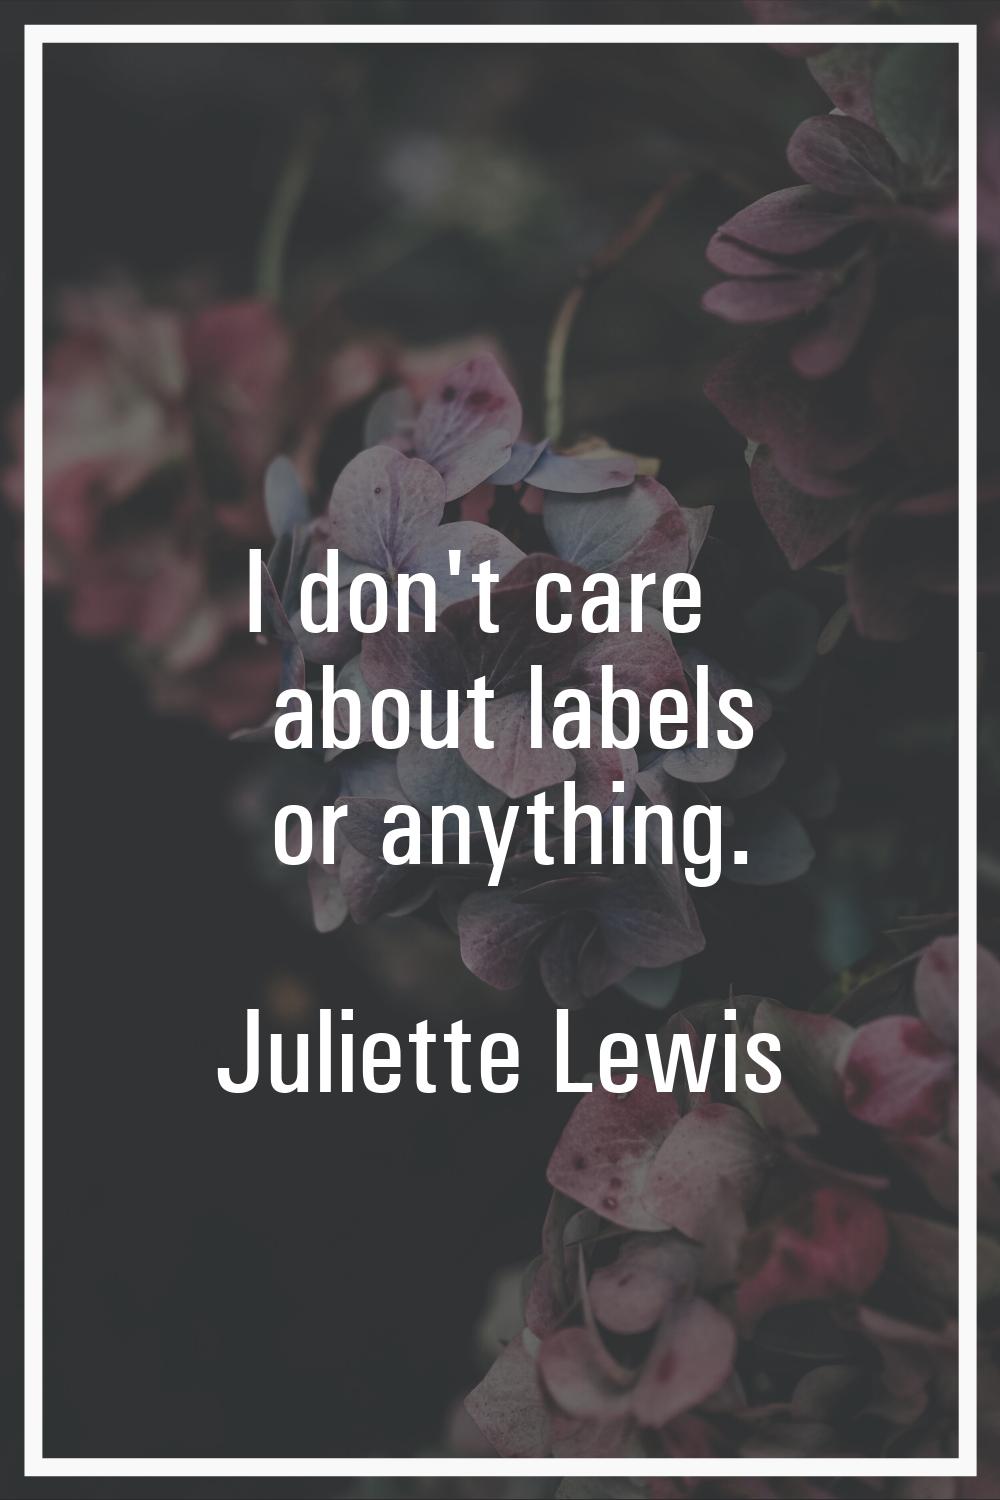 I don't care about labels or anything.